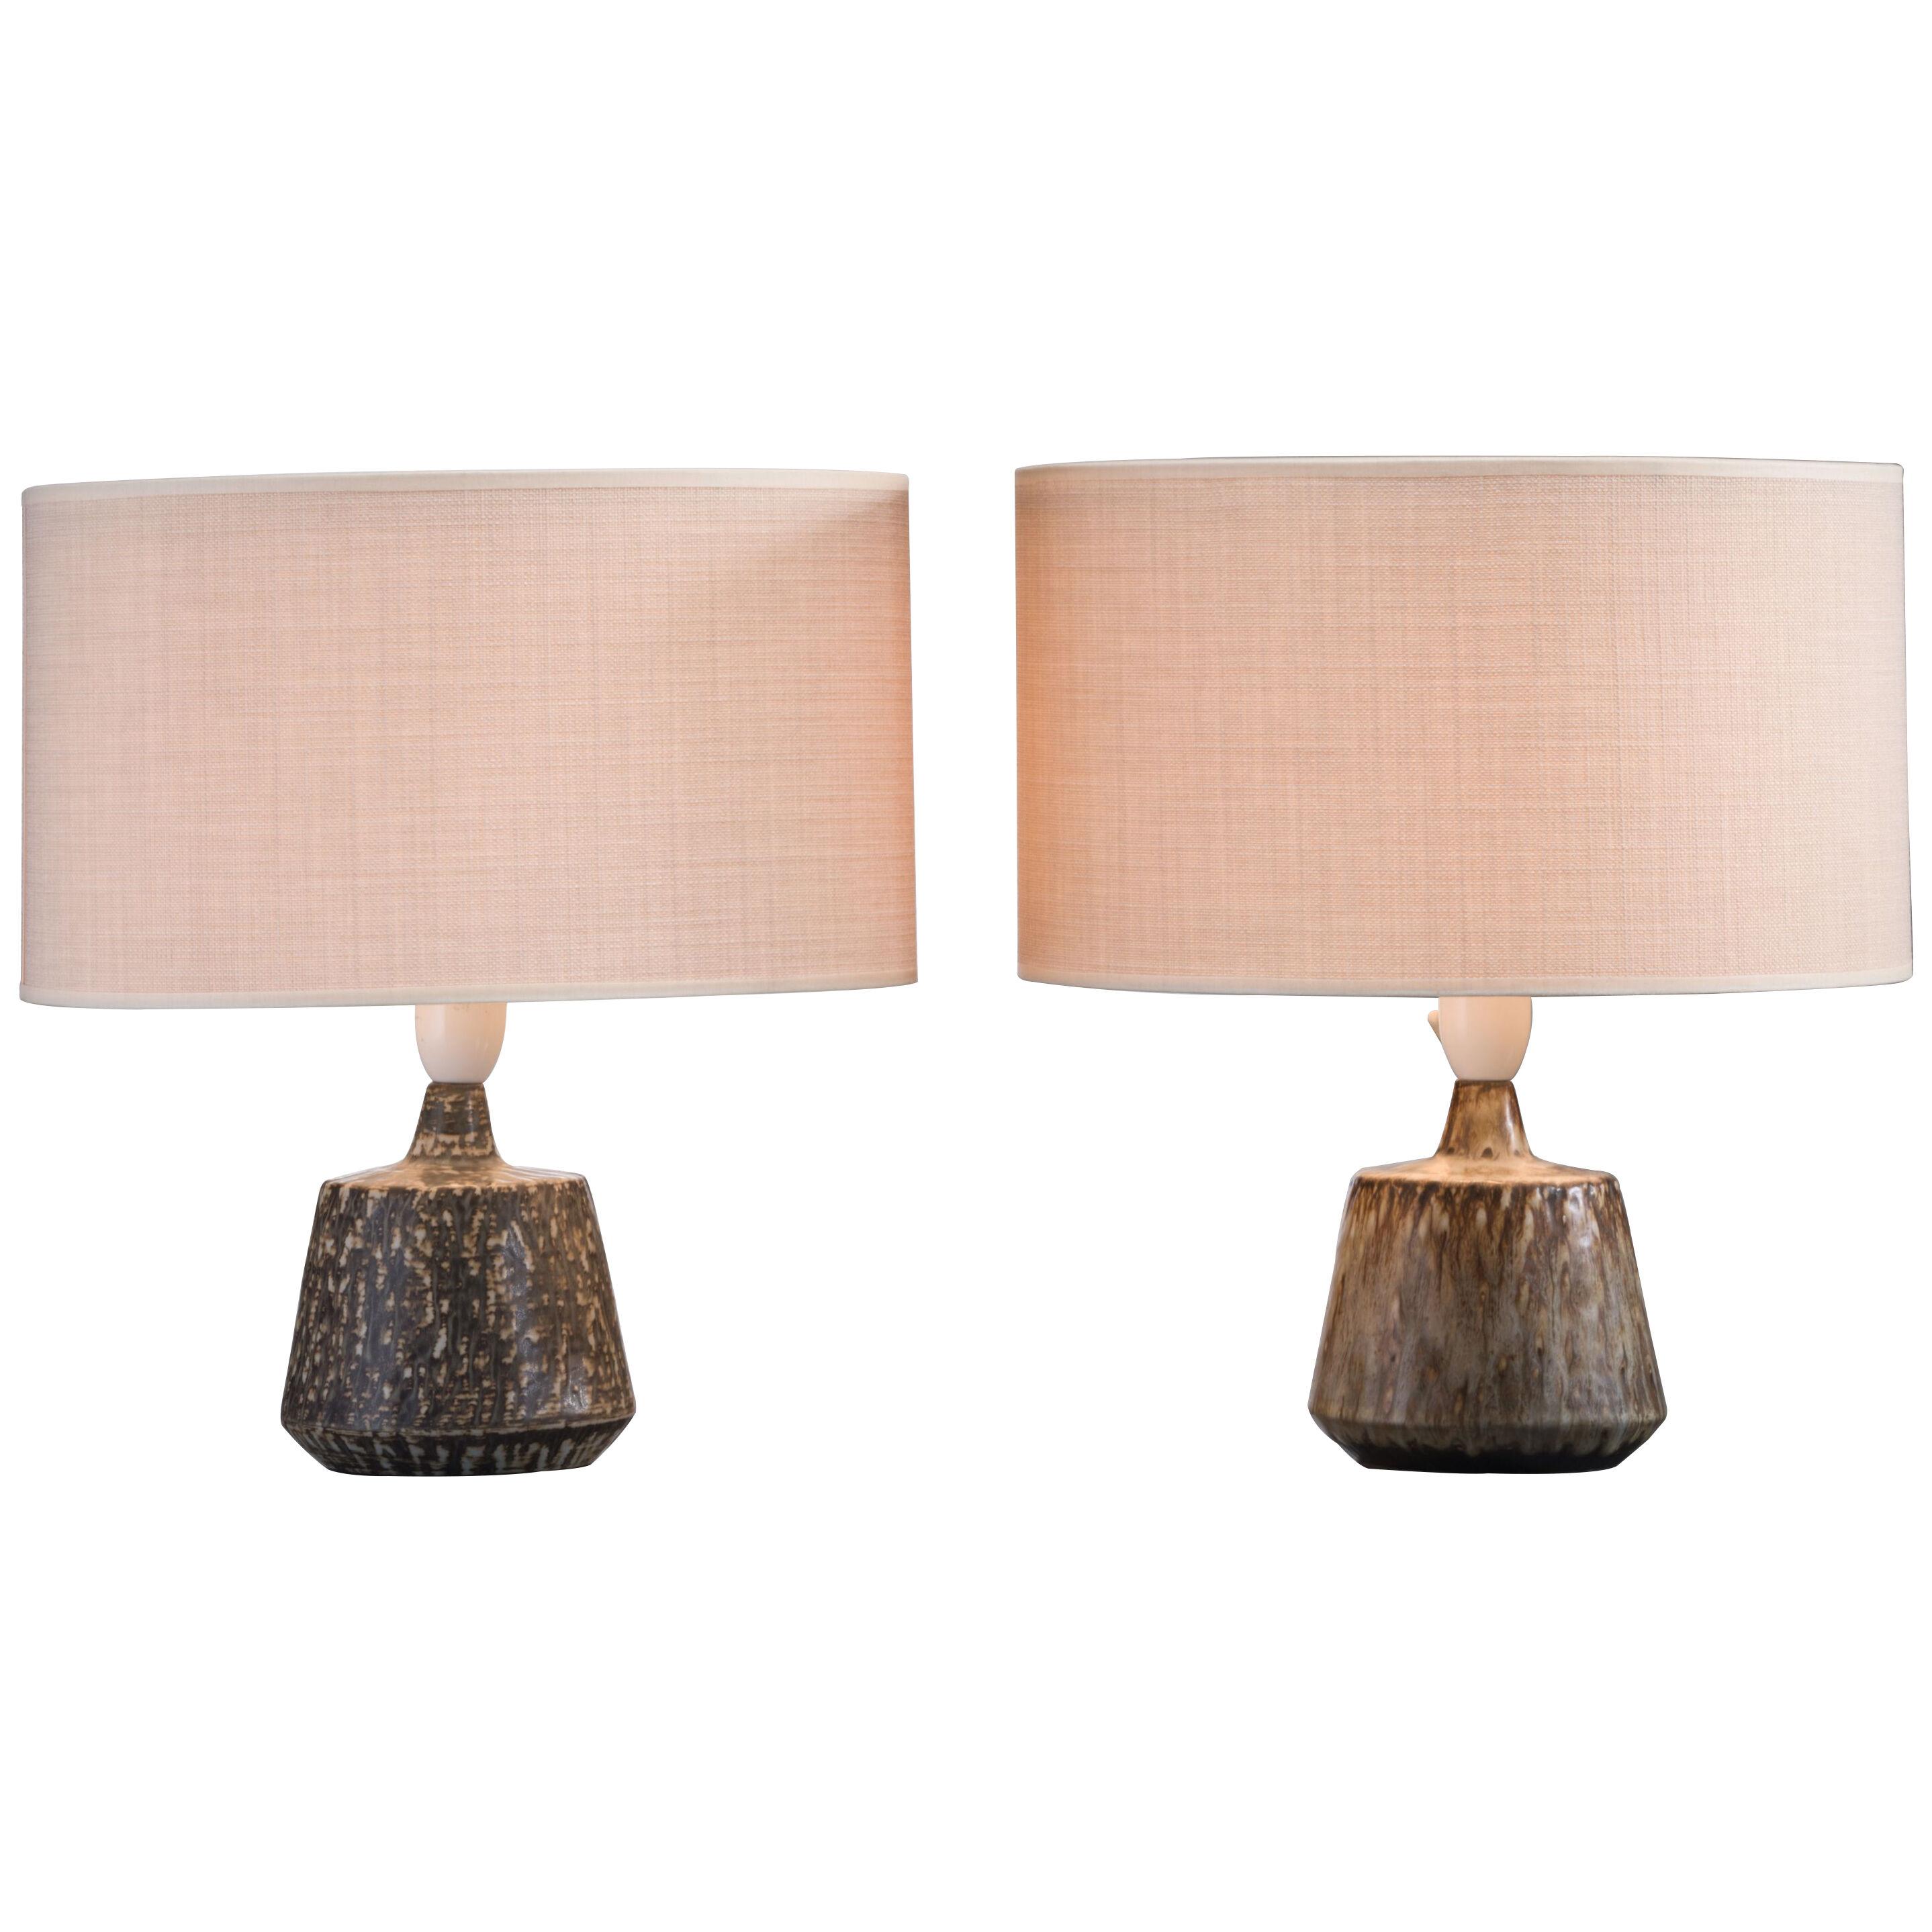 Gunnar Nylund a-synchronic pair of ceramic table lamps, Sweden